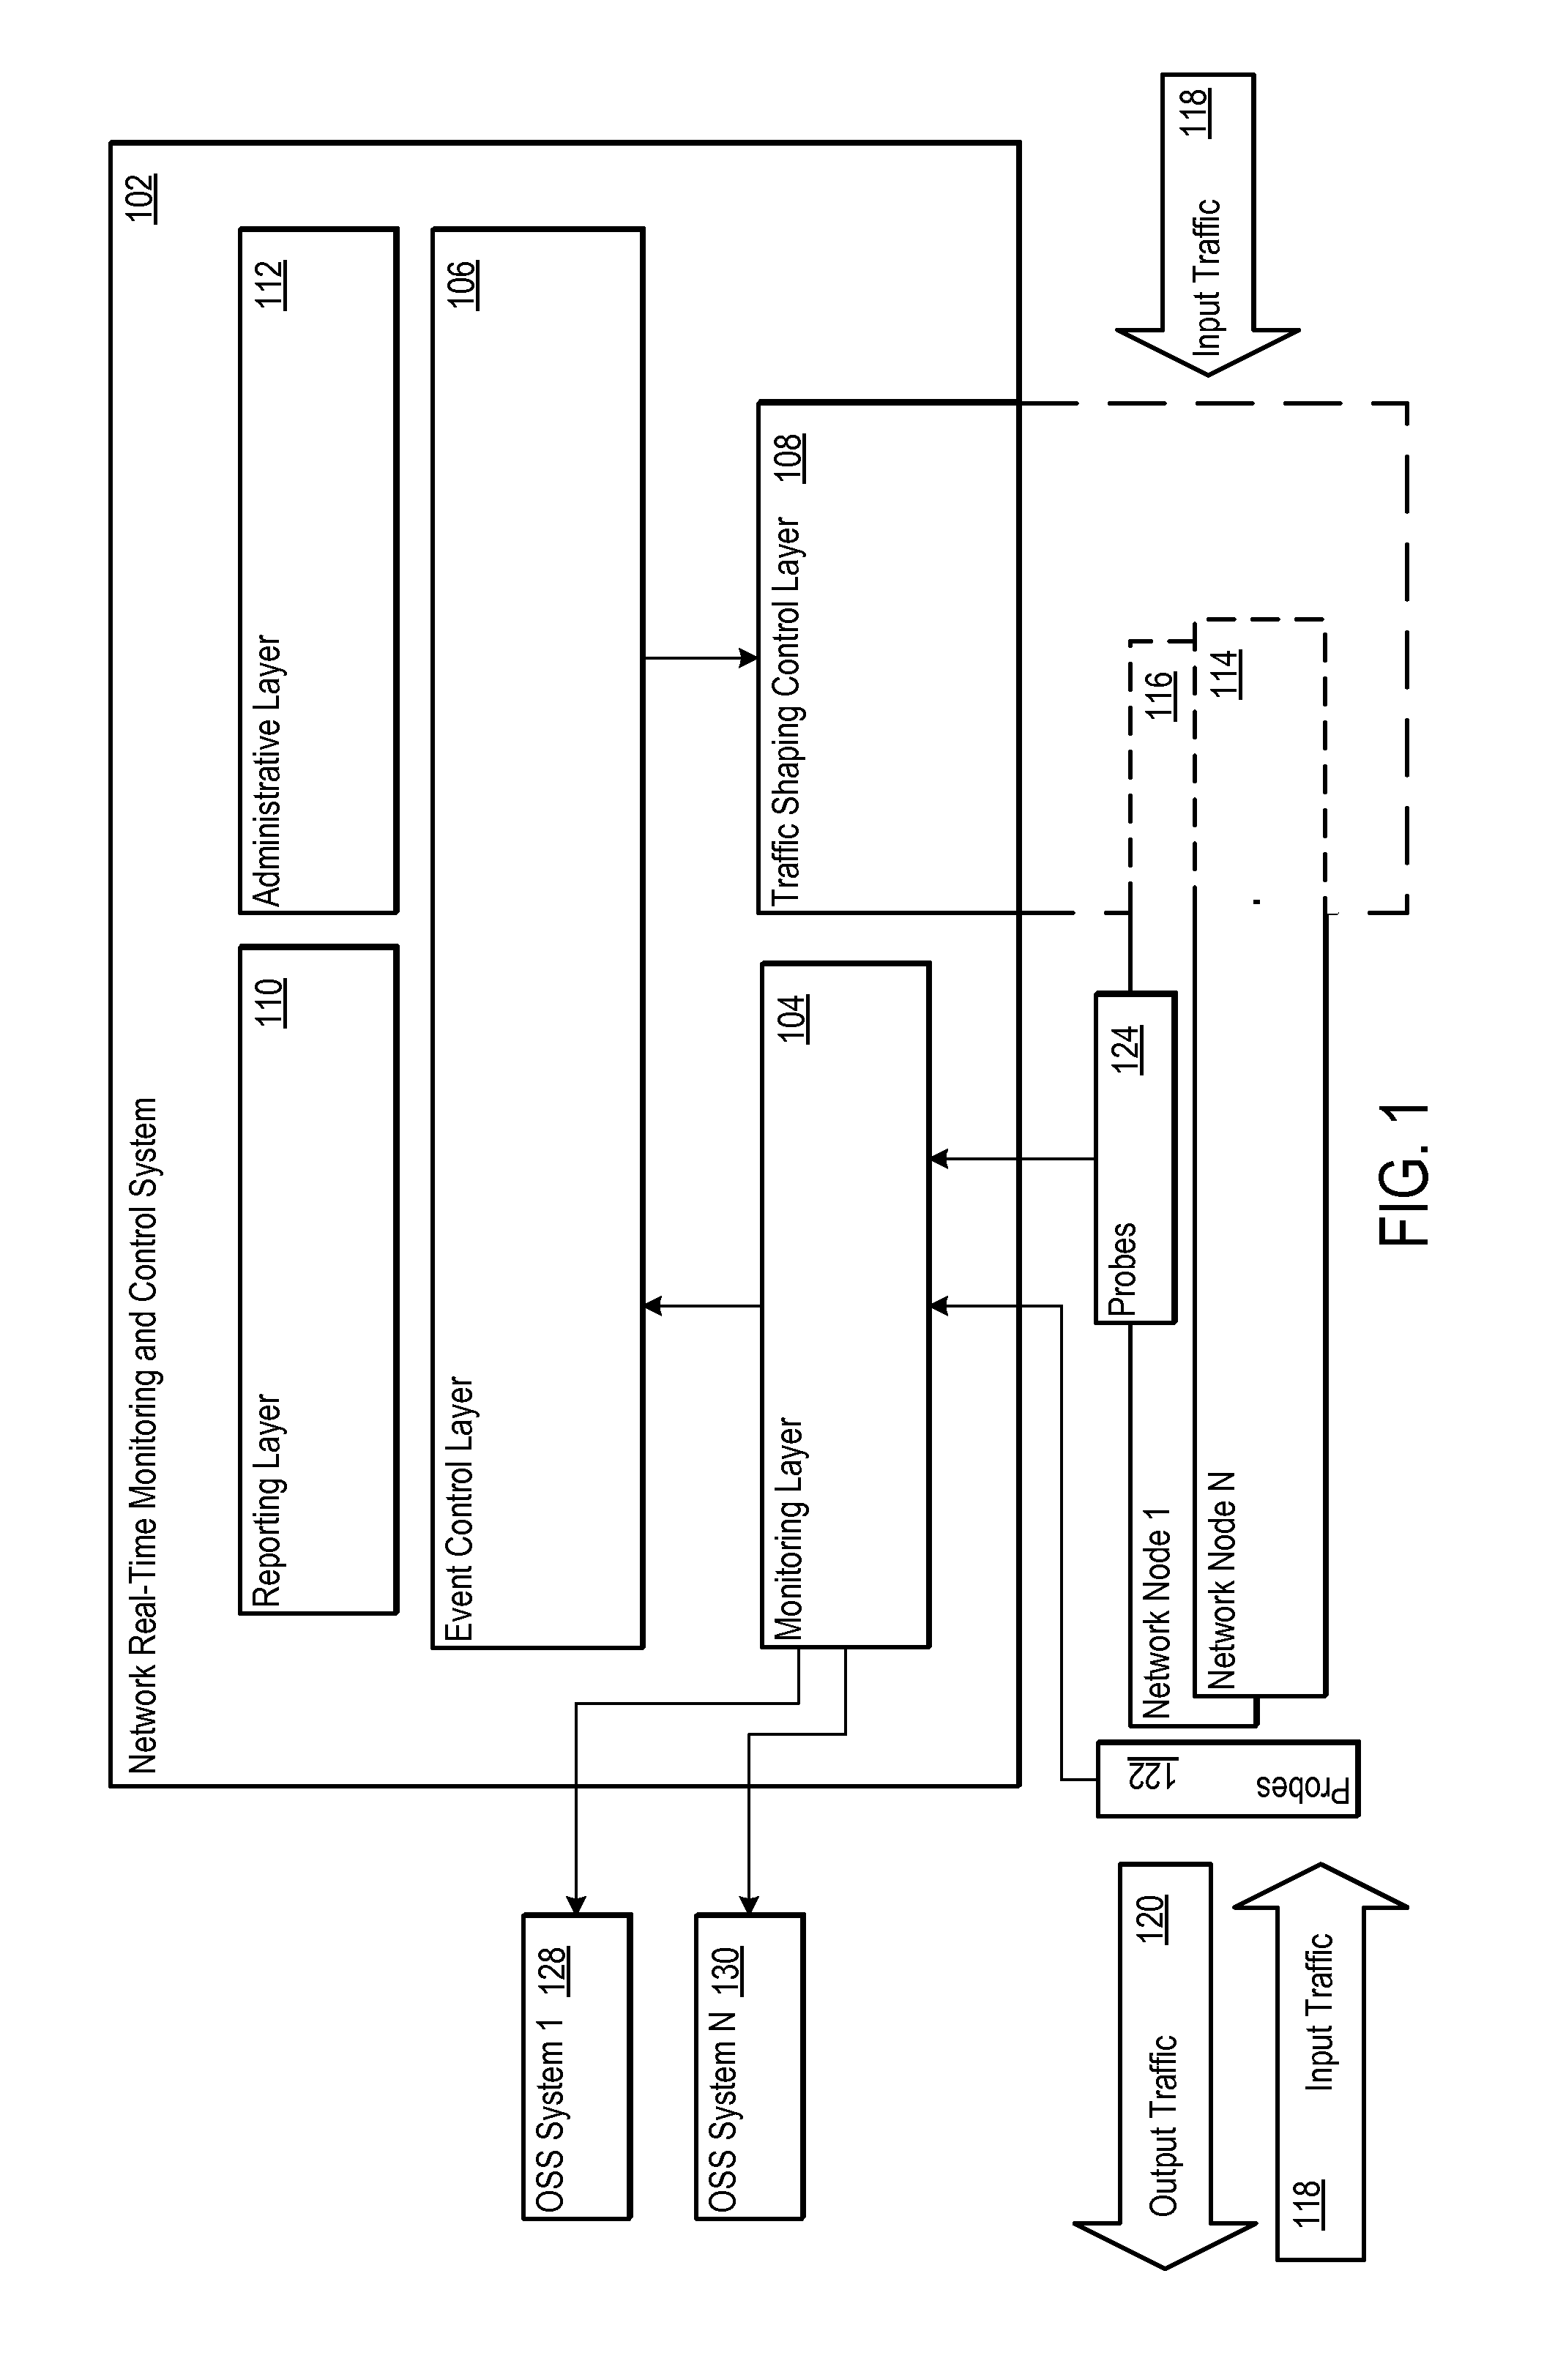 Network real time monitoring and control system